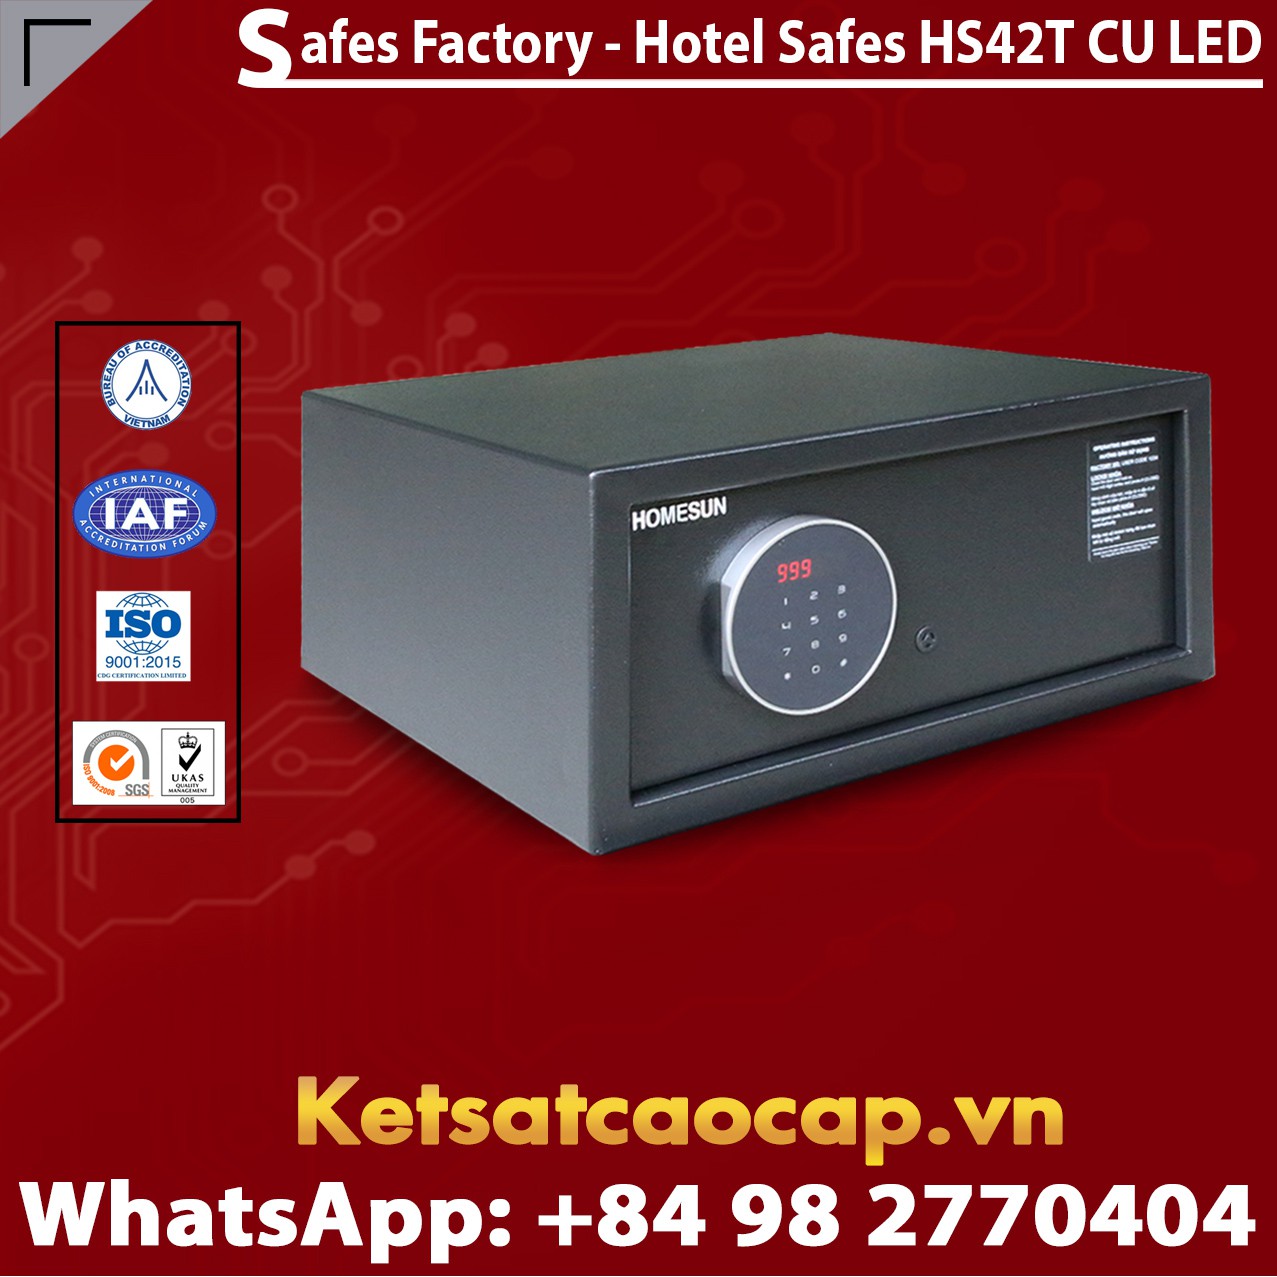 Safe For Hotels, Hospitality And Office